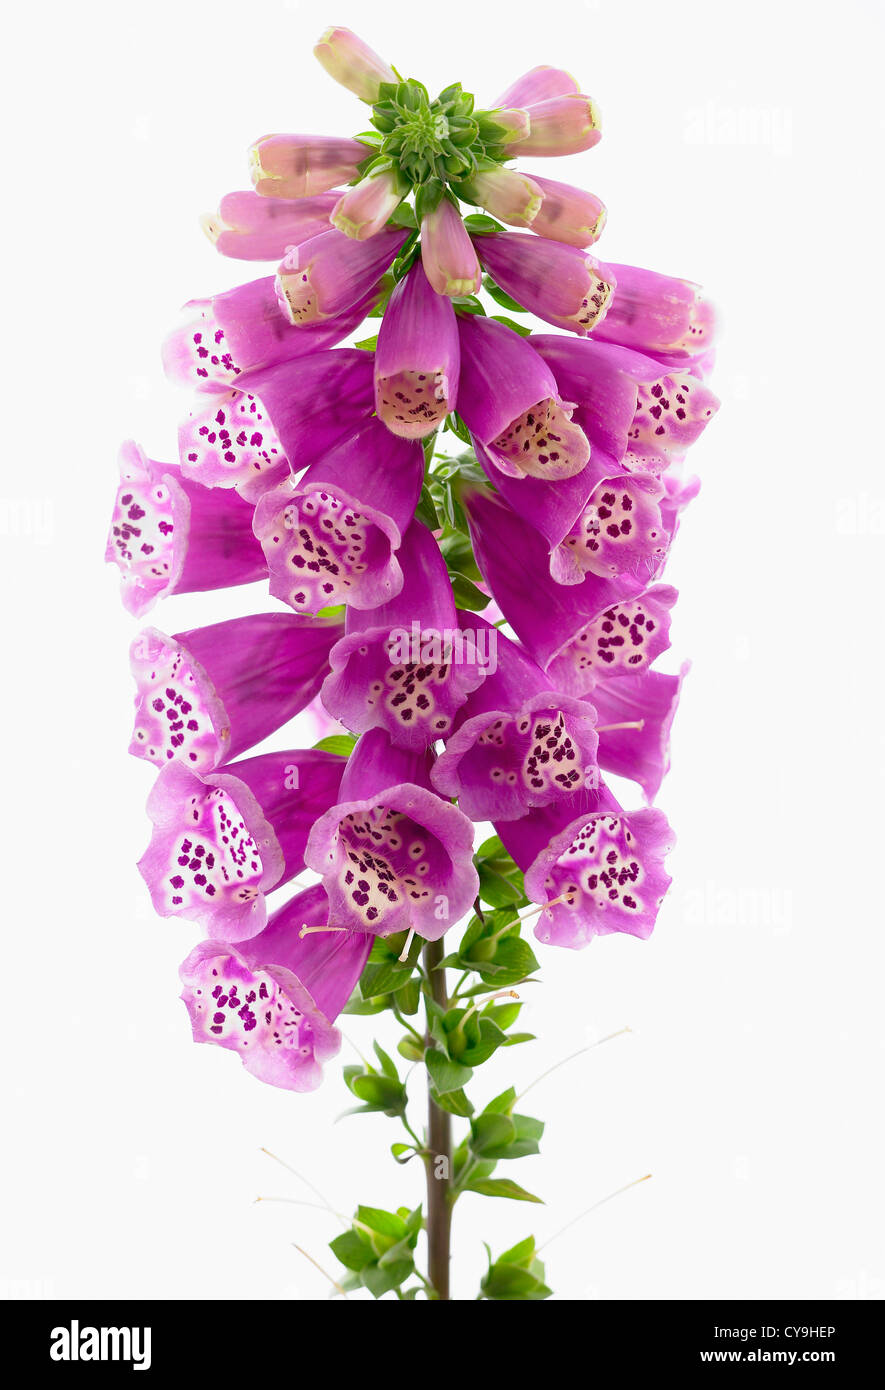 Digitalis purpurea, Foxglove. Purple bell shaped flowers on a single stem of a cottage garden plant against a white background. Stock Photo